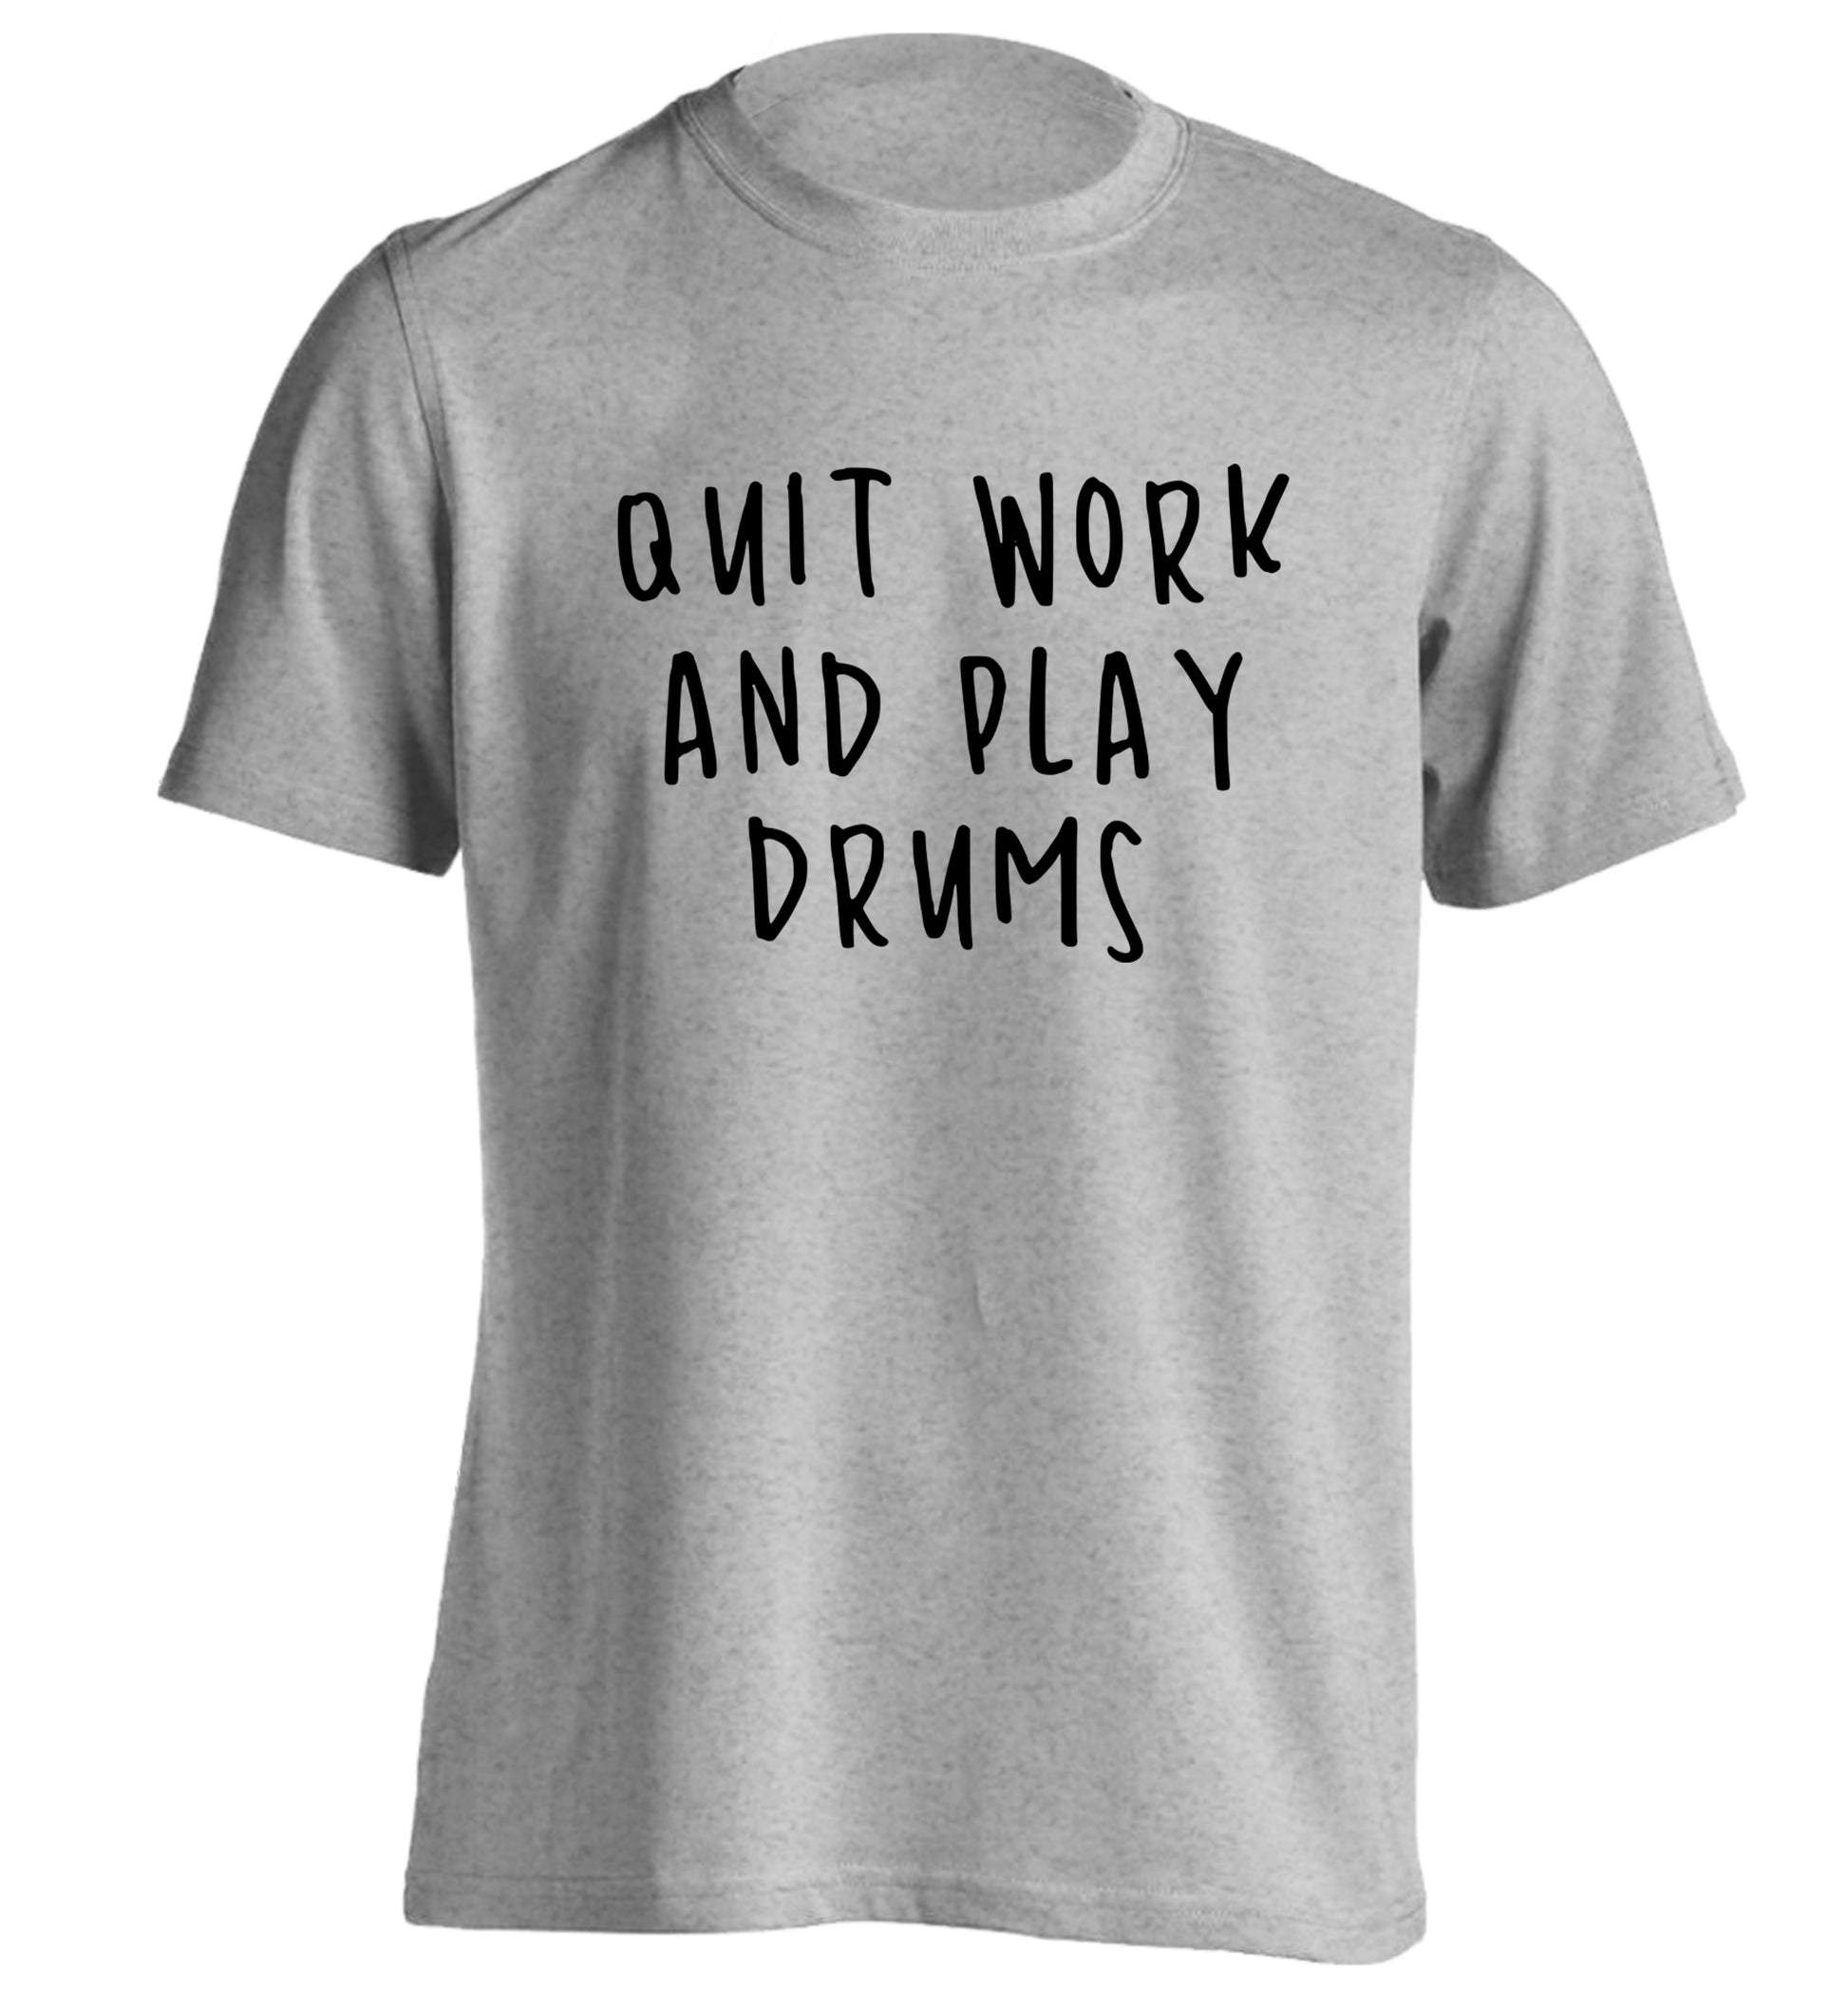 Quit work and play drums adults unisex grey Tshirt 2XL